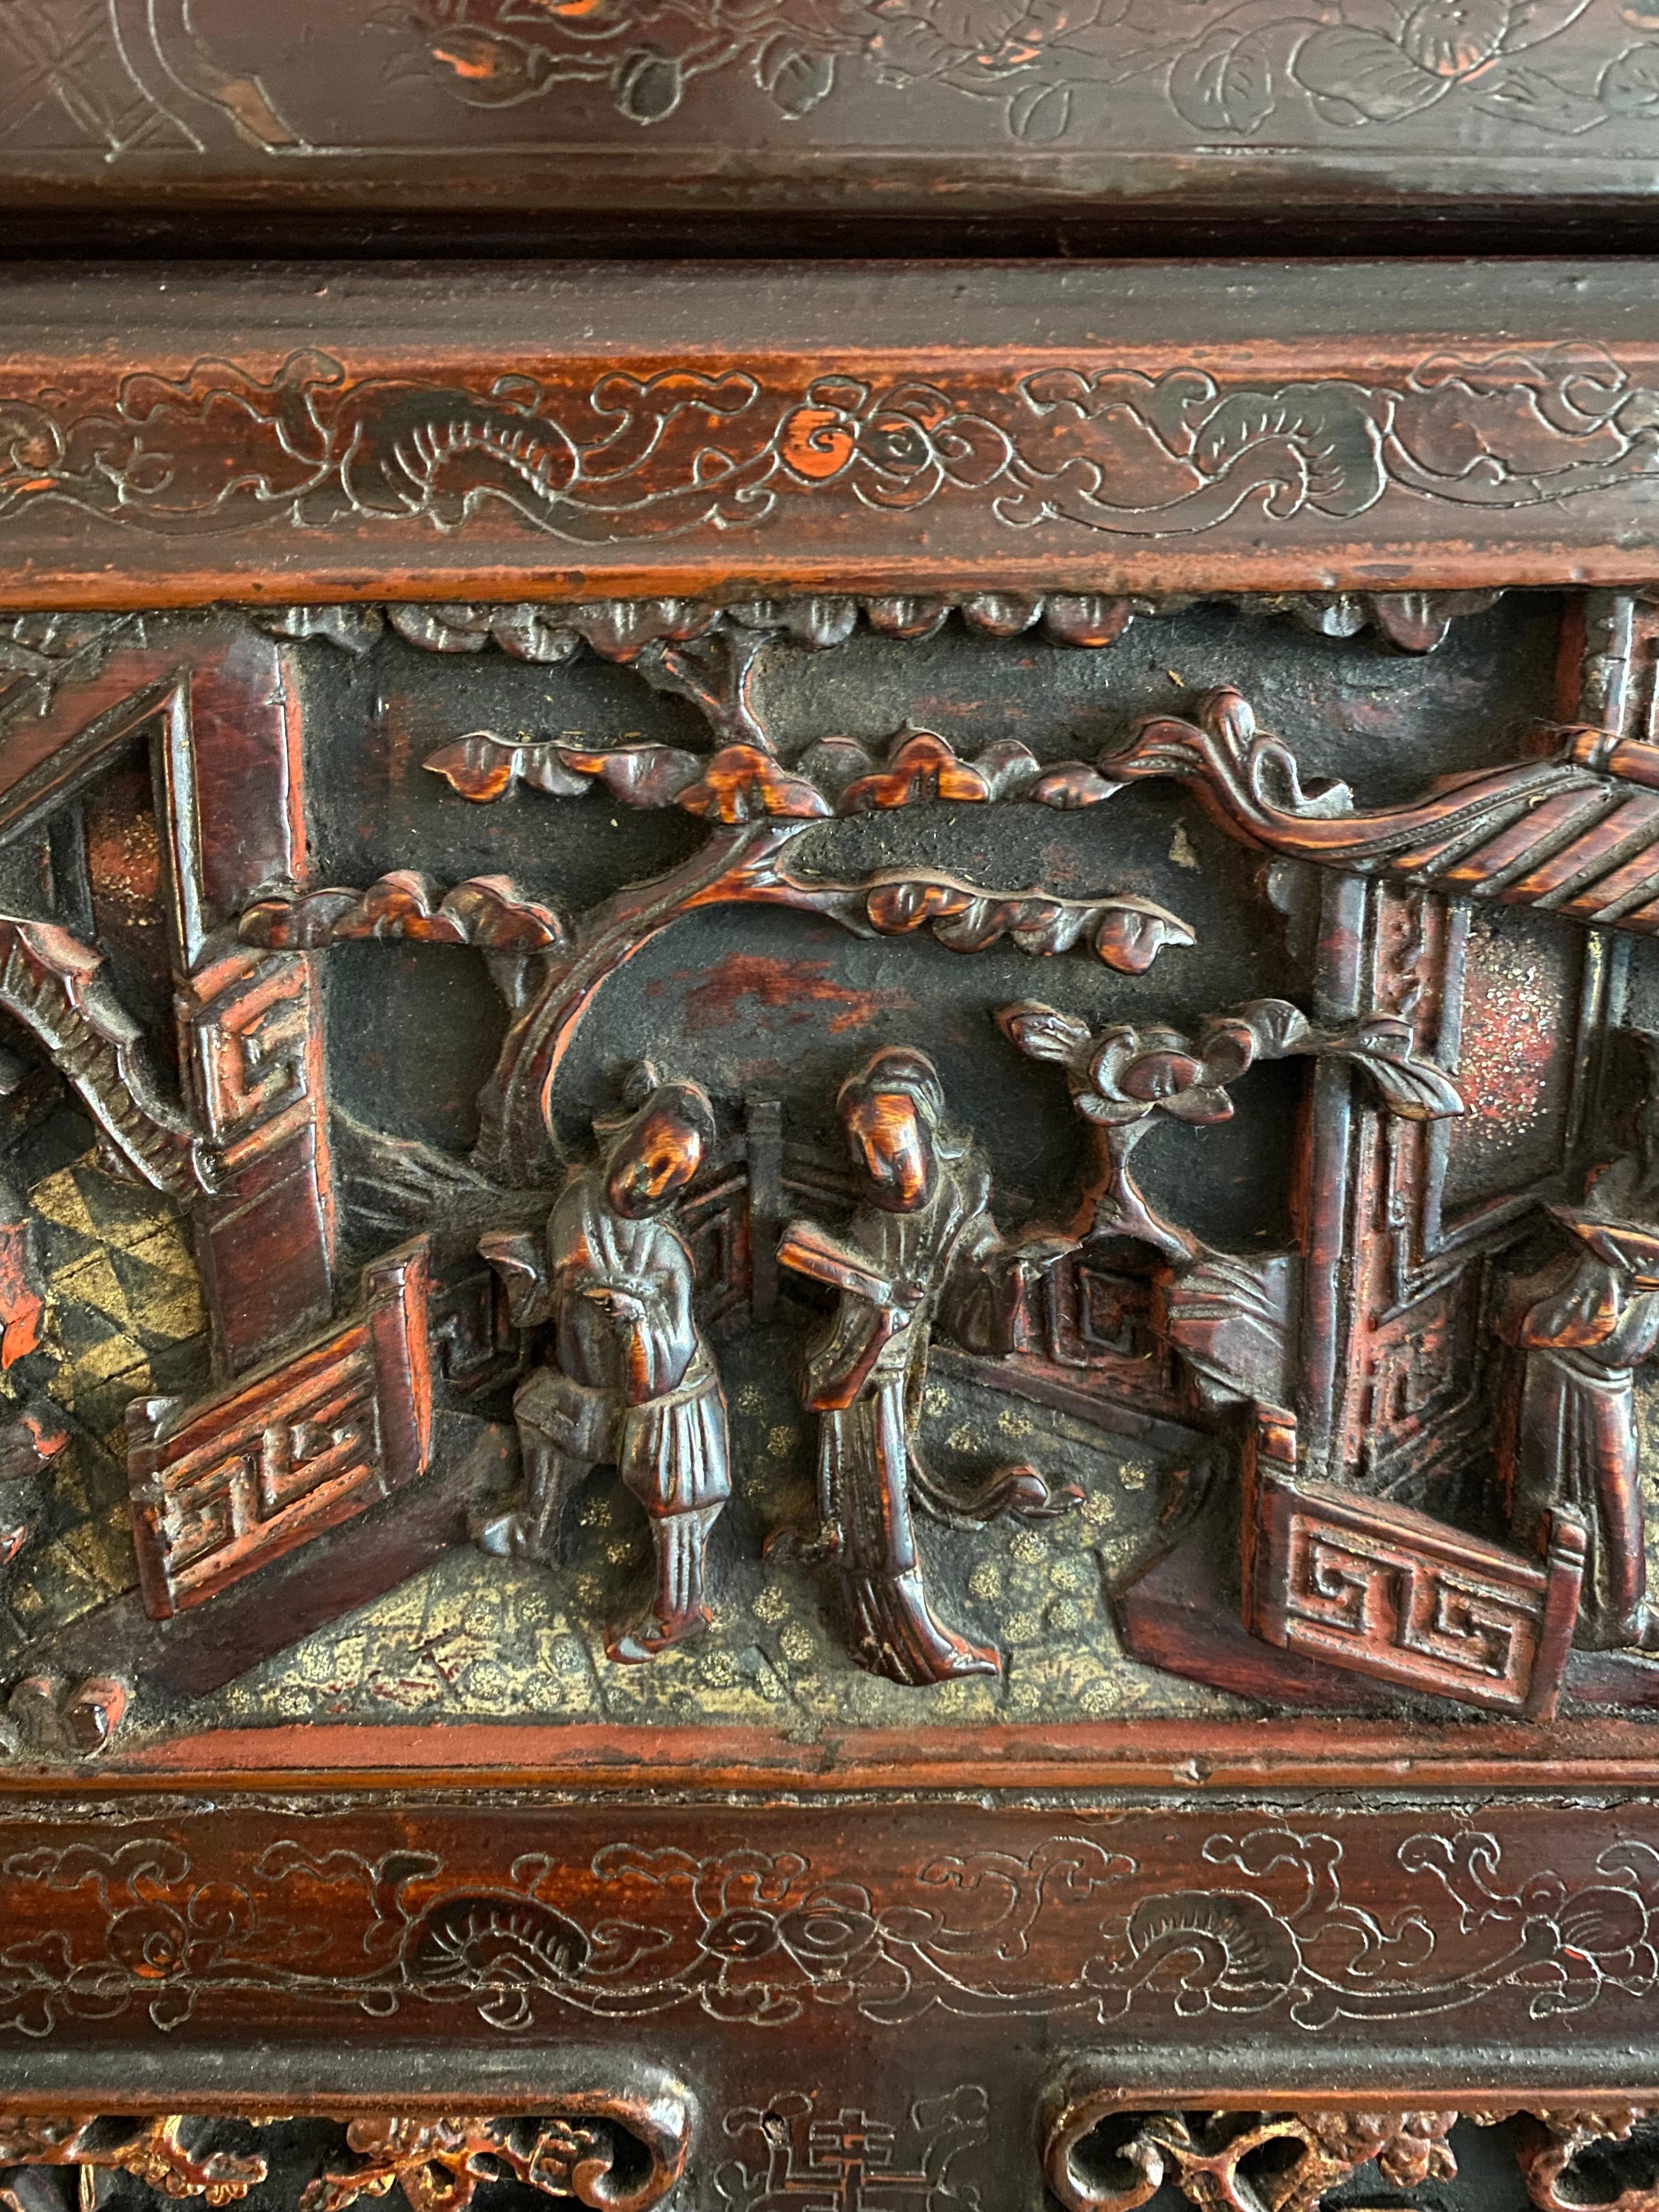 An exceptional early 19th century Chinoiserie cupboard of carved wood, gilt, lacquer and applied intricate designs. 

A delicately proportioned piece with a long horizontal cupboard at the top, a long drawer at the bottom and 2 cupboard doors